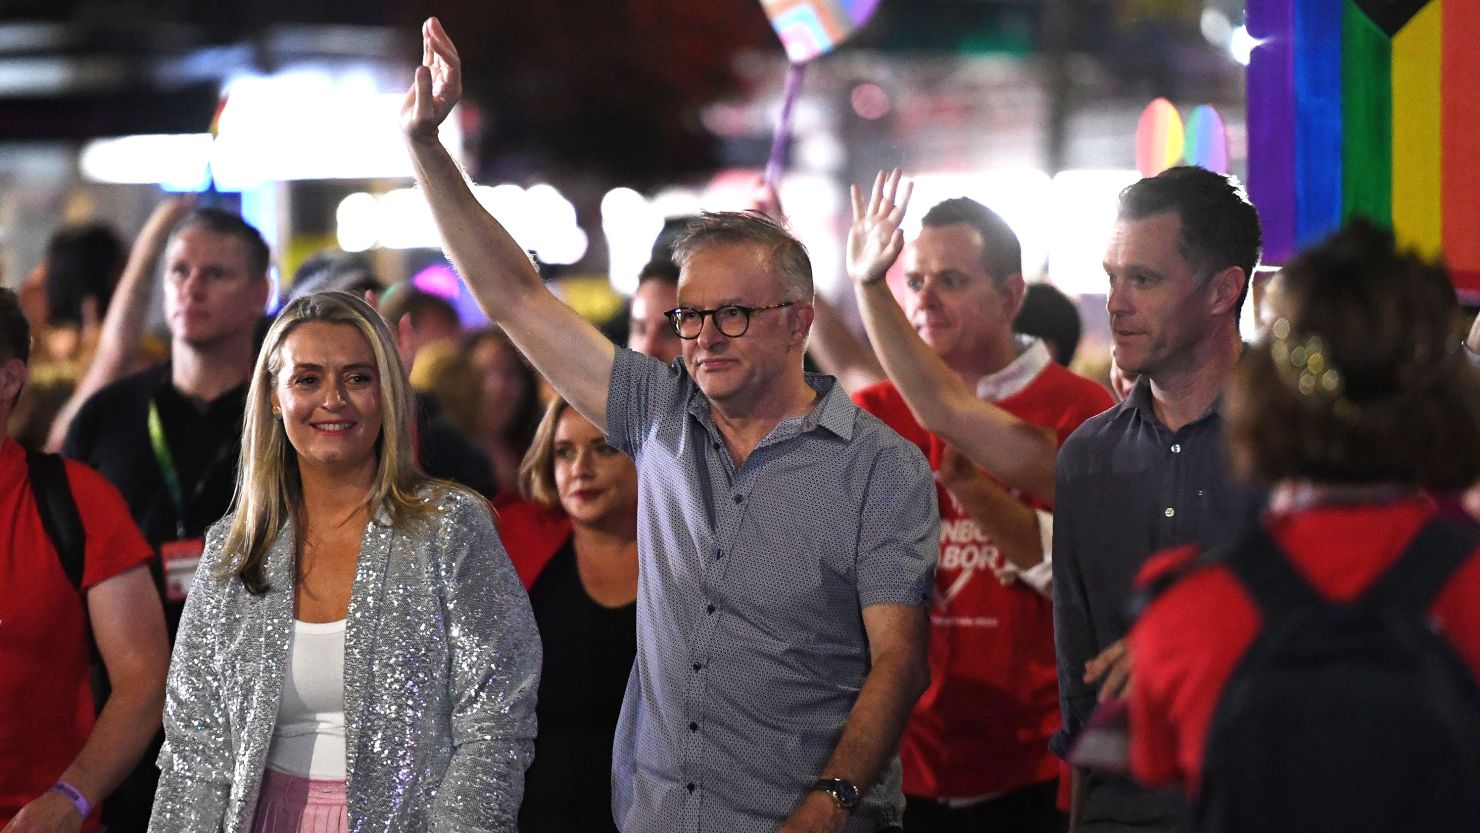 Australia's Prime Minister Anthony Albanese (C) attends the 45th annual Gay and Lesbian Mardi Gras parade on Oxford Street in Sydney, Australia, 25 February 2023.